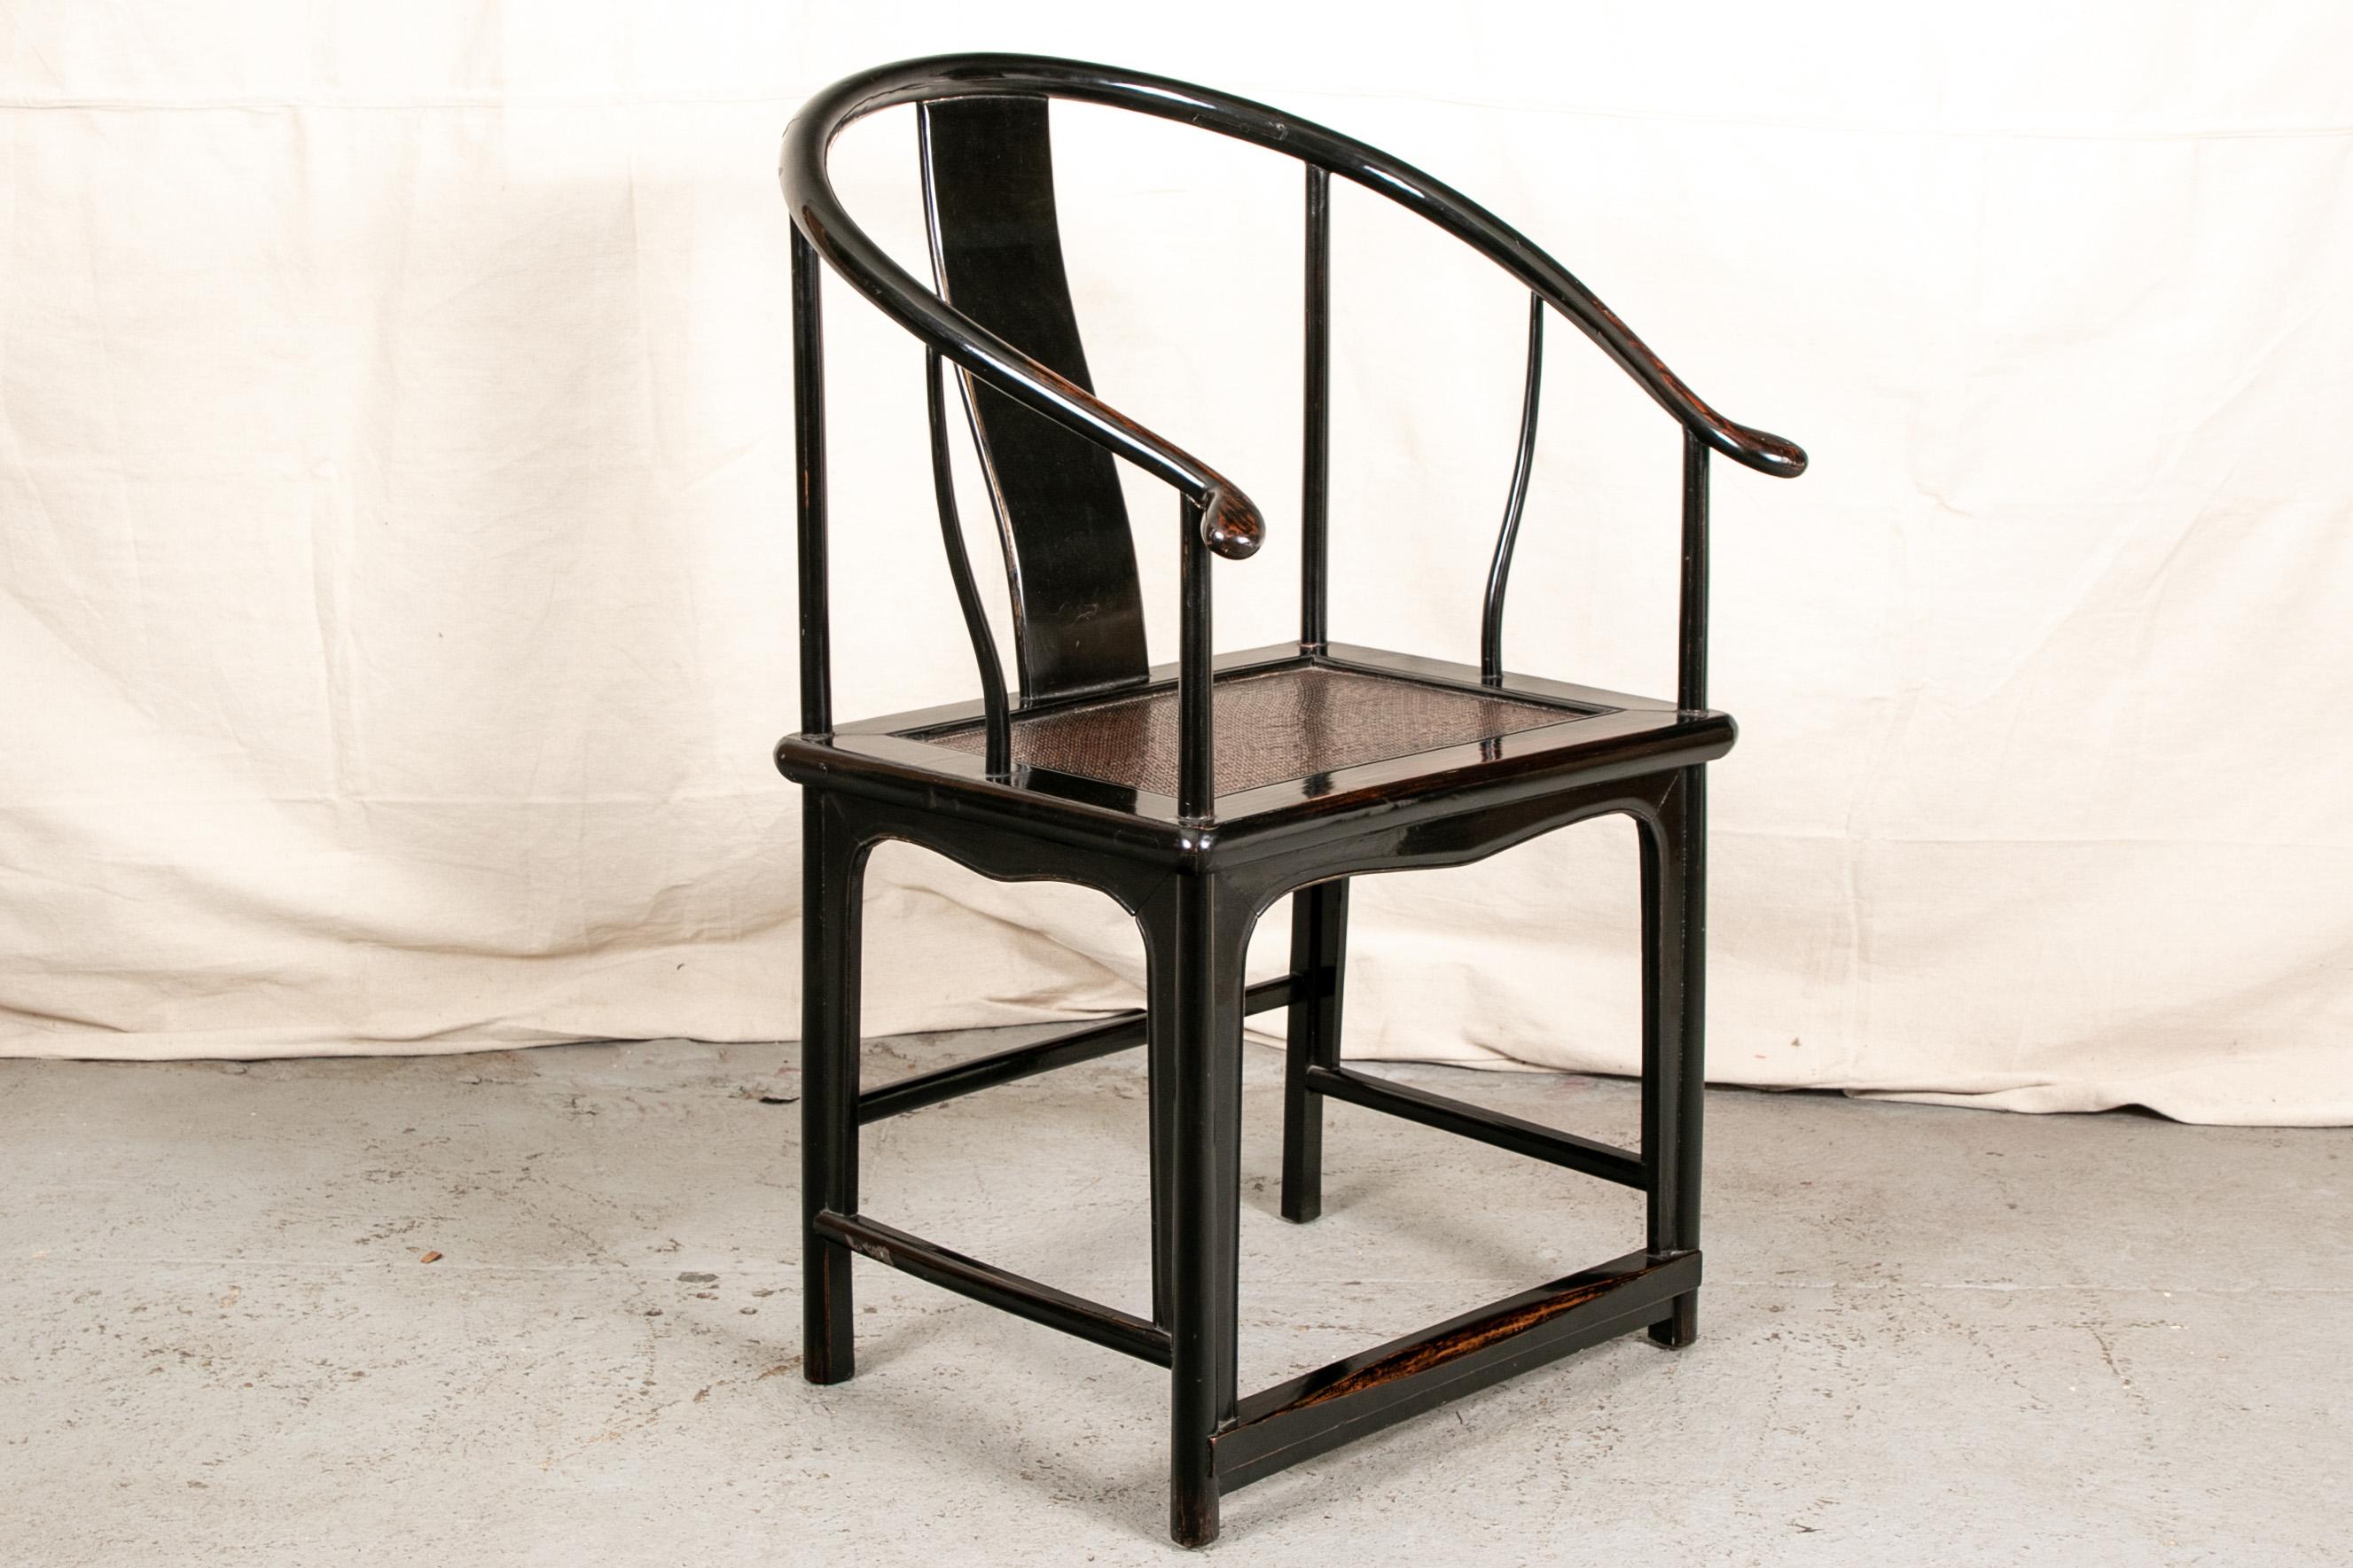 Classic Chinese armchair, ebonized rosewood in the Classic shape with wide recessed seat with brown wicker panel, scrolled arms, shaped lower frame with inset half round legs. Four stretchers. In a fine patina. 

Condition: Expected wear and signs